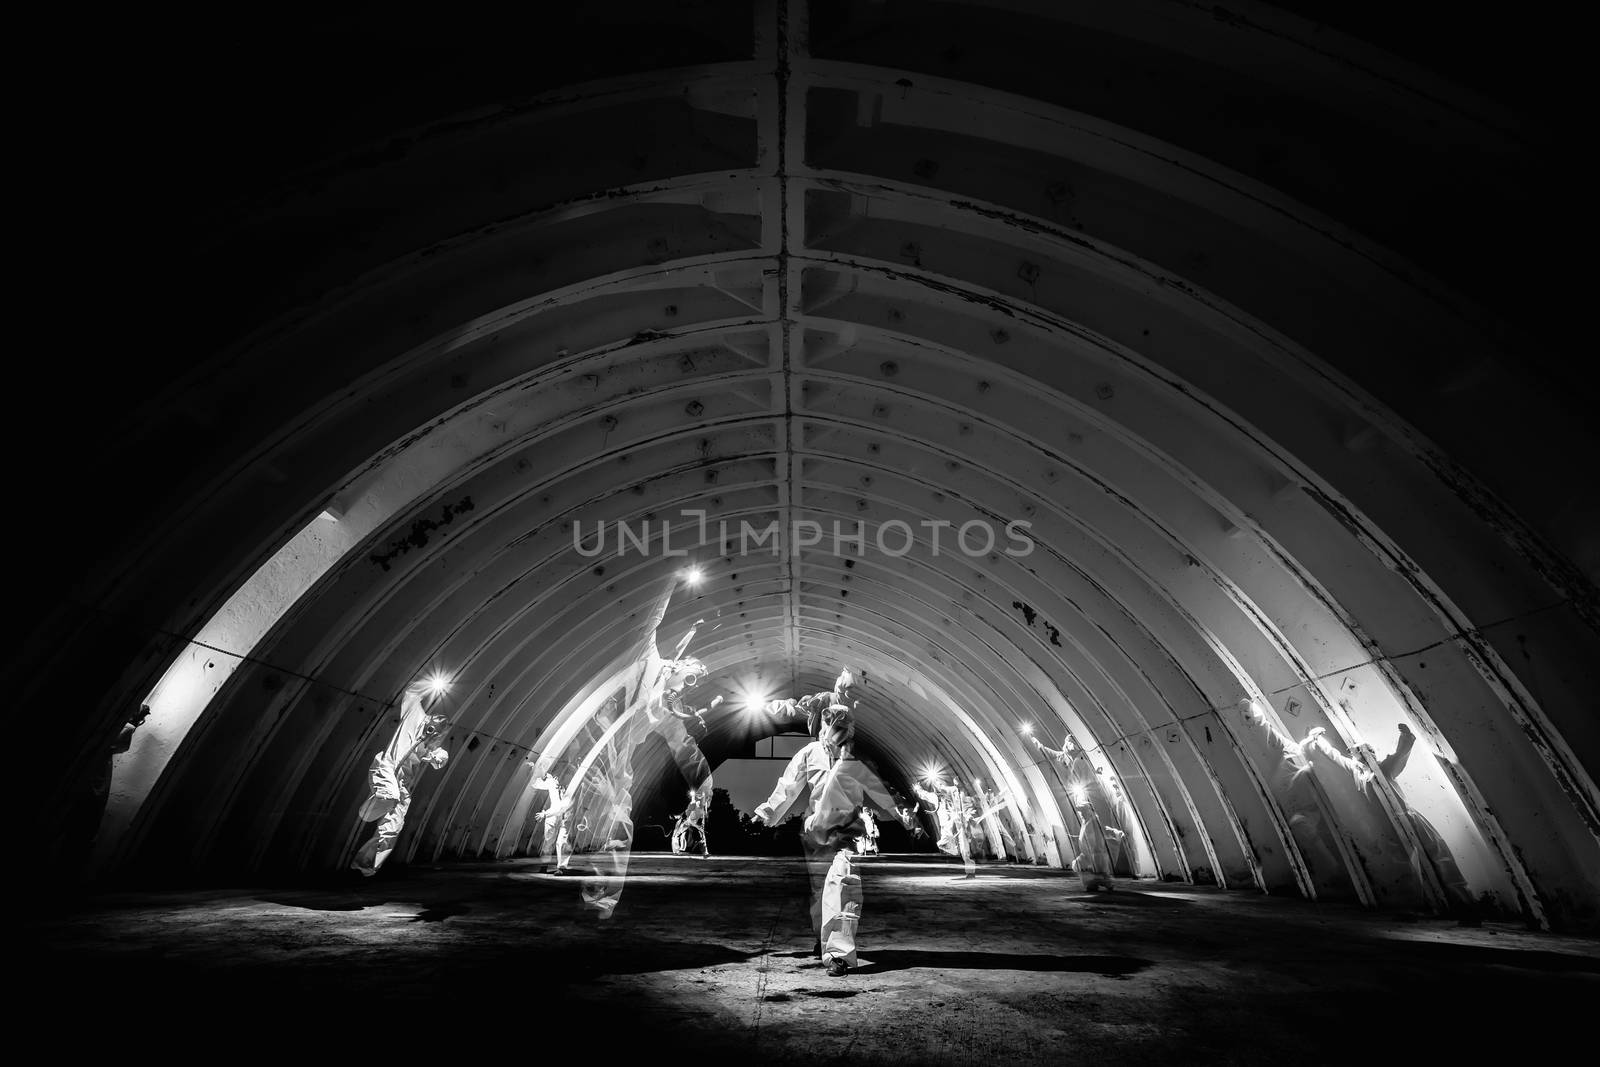 Ghosts in dark tunnel of nuclear power plant by DmitrySteshenko